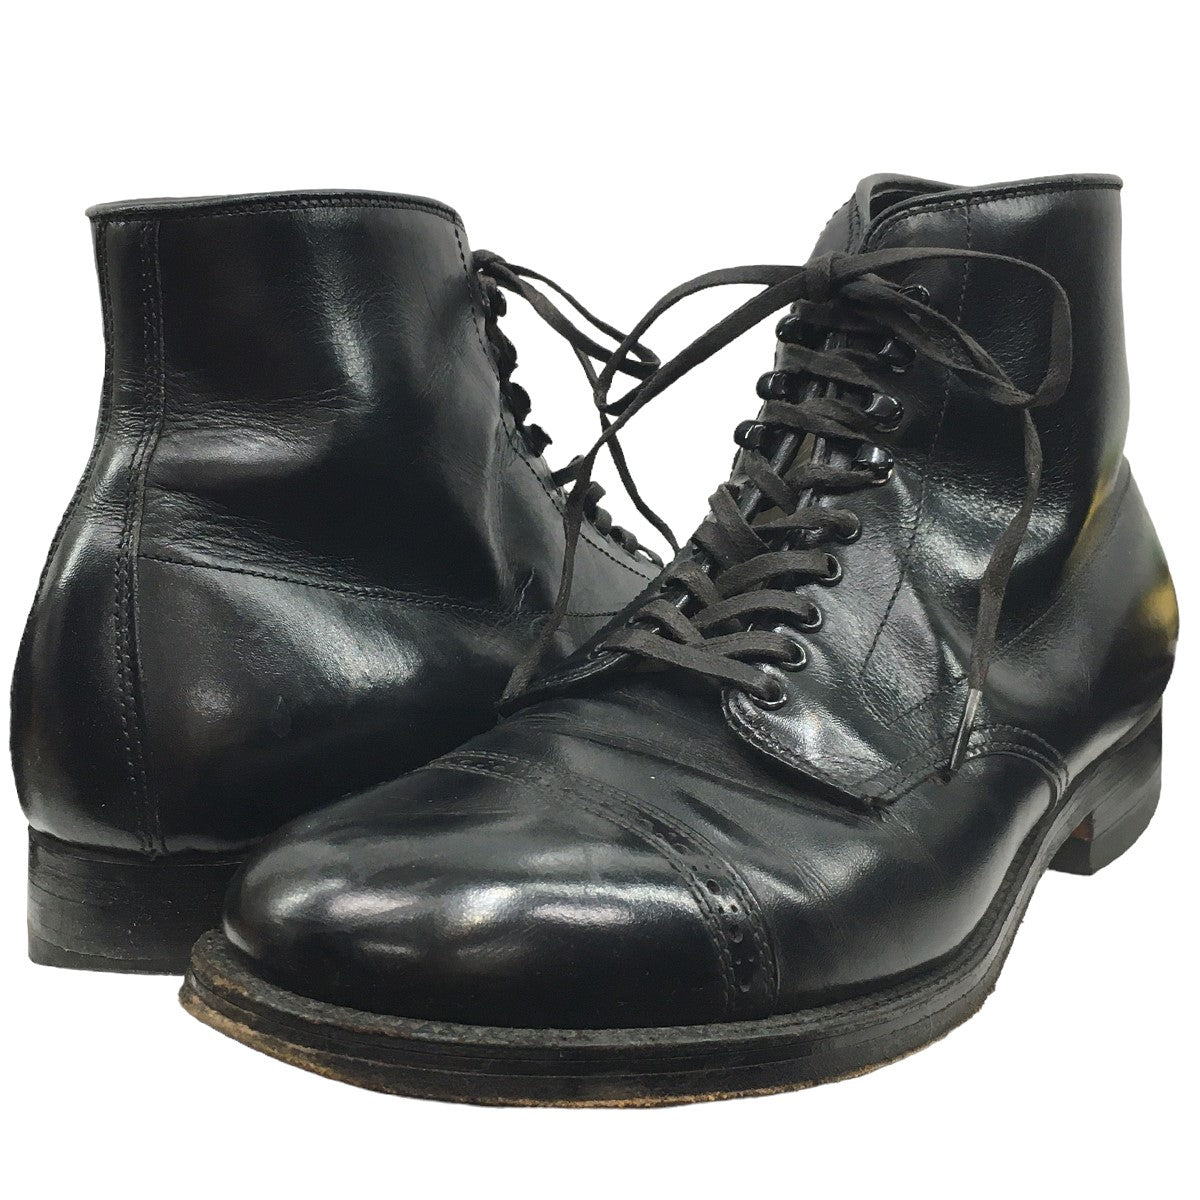 ALDEN(オールデン) Punched Cap toe Lace up Boots パンチド キャップ 